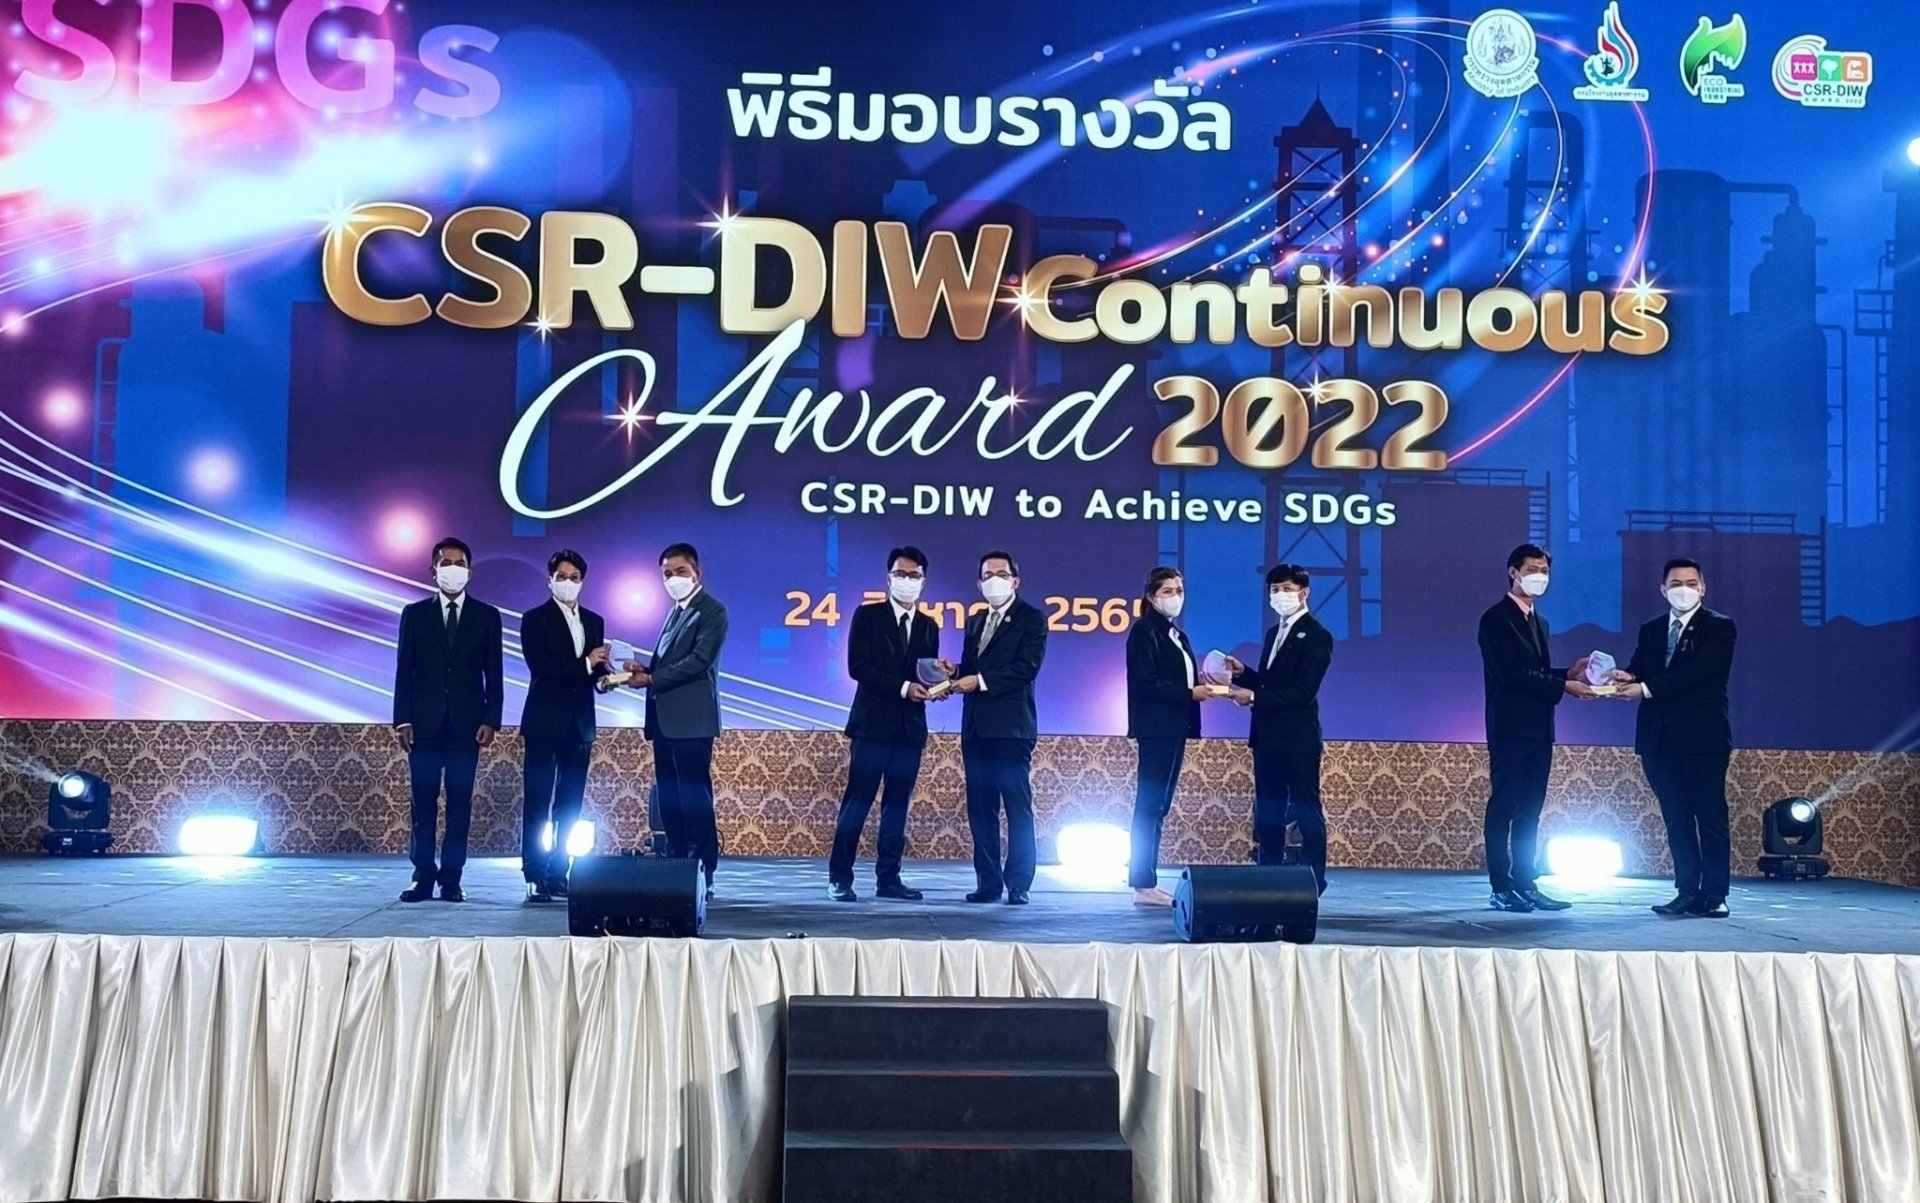 HFC received the CSR-DIW Continuous Award 2022